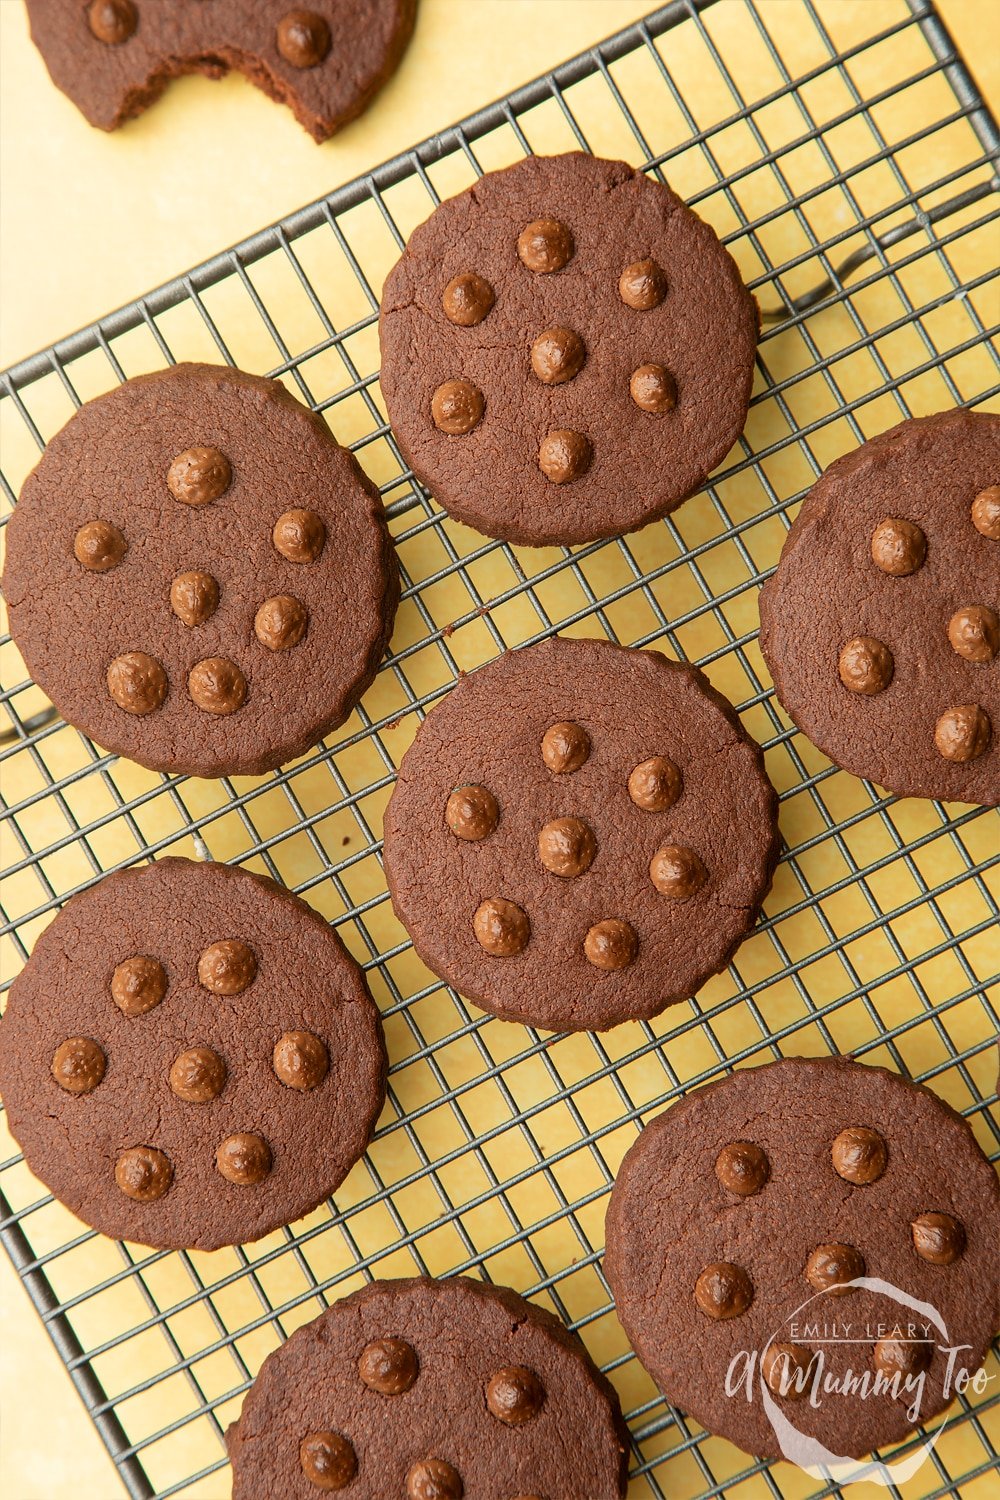 Chocolate shortbread cookies, studded with chocolate drops, cooling on a wire rack.